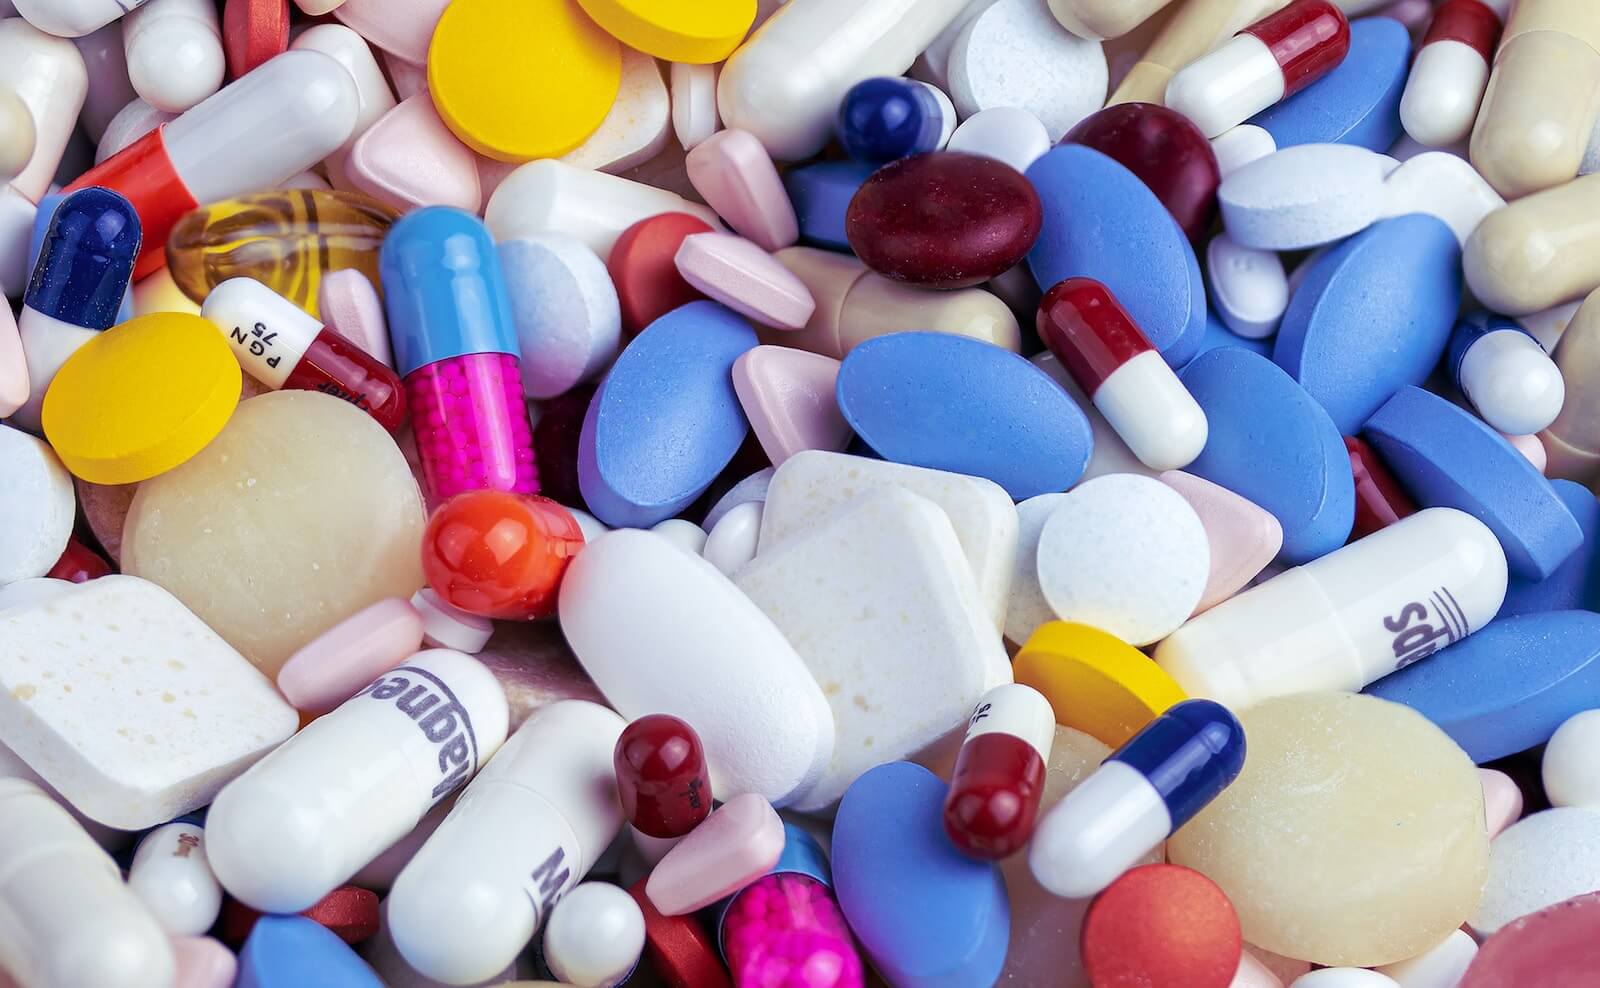 A pile of different colored pills